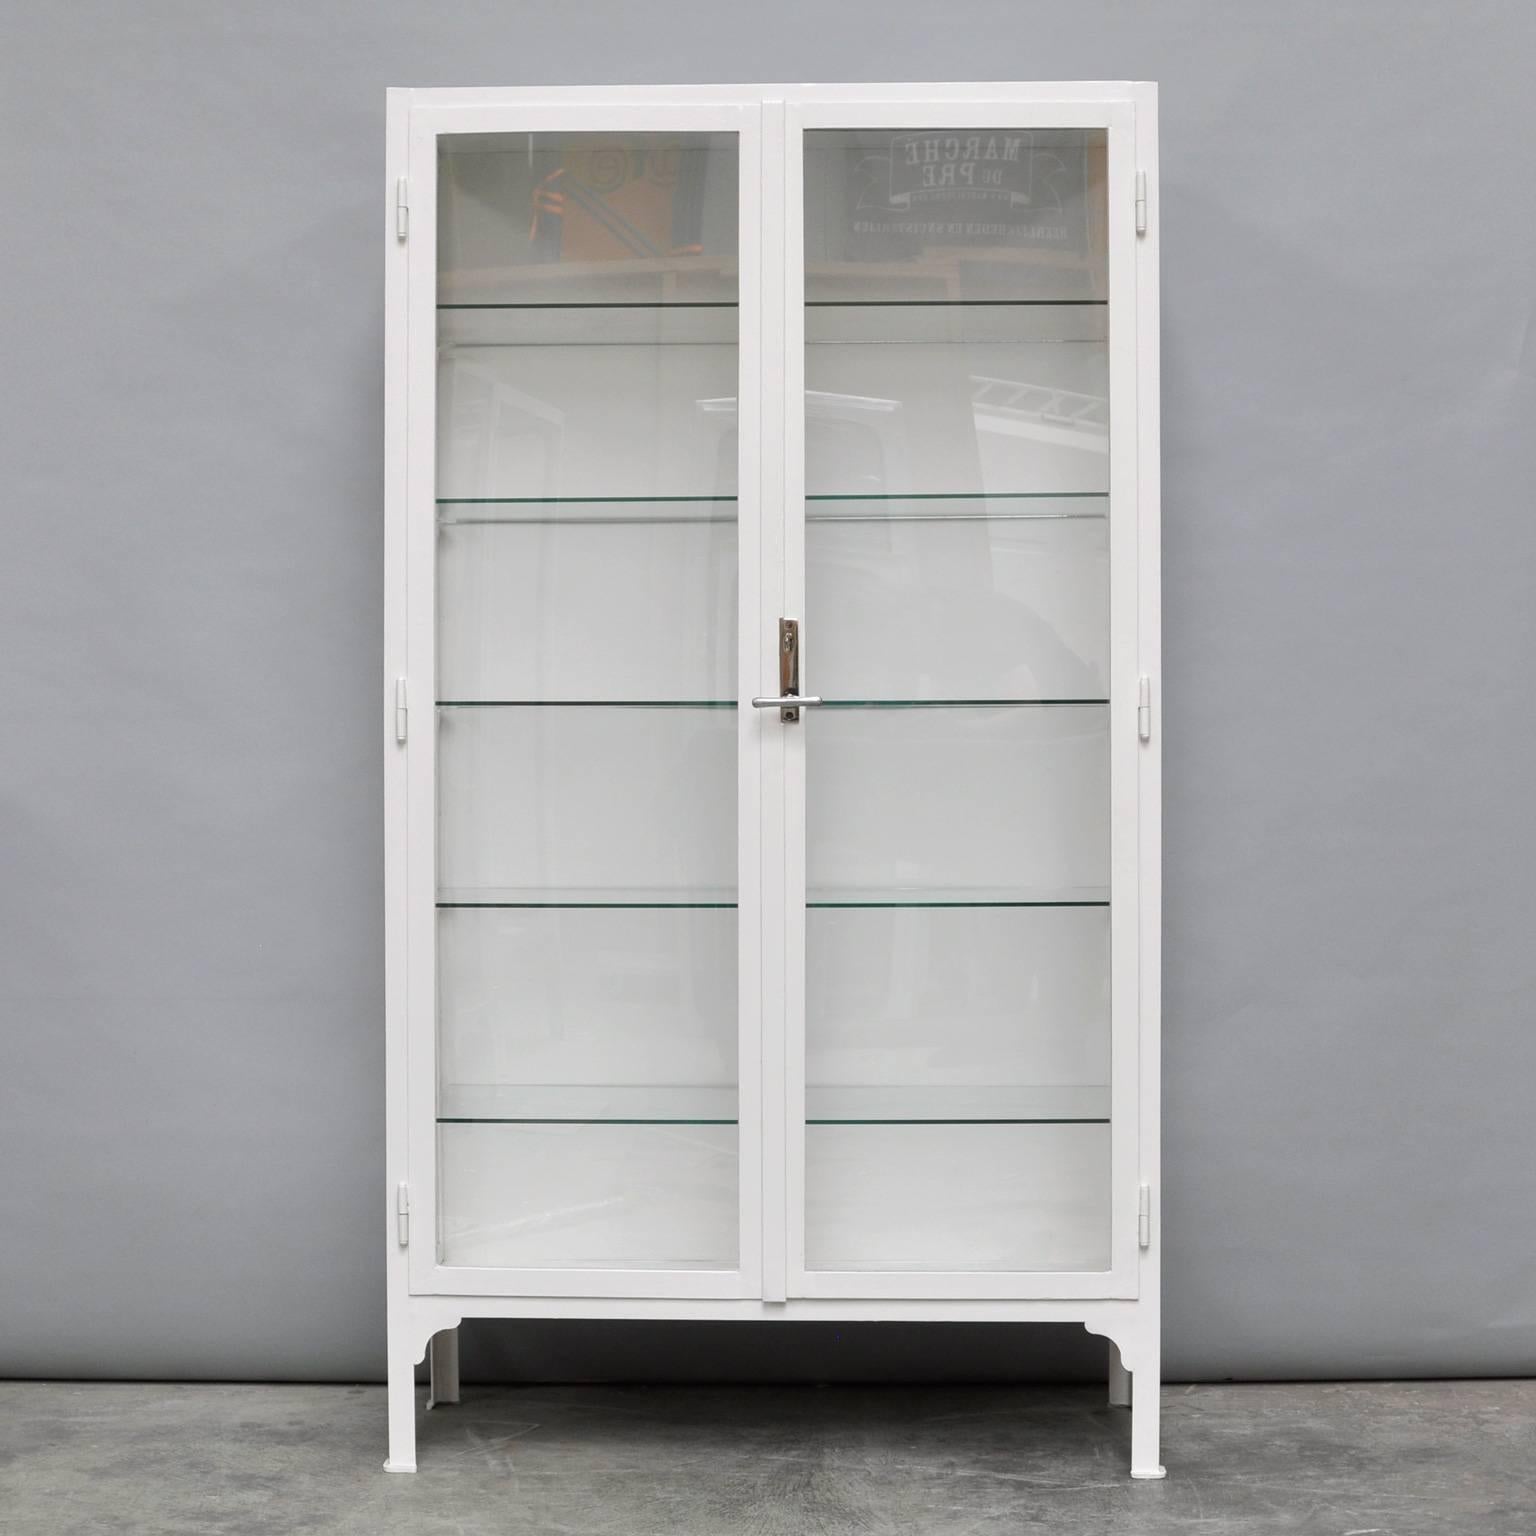 This medicine cabinet was produced in the 1940s in Hungary. The cabinet is made from thick steel and glass. It features five (new) glass shelves. In an excellent condition. The cabinet has been restored.